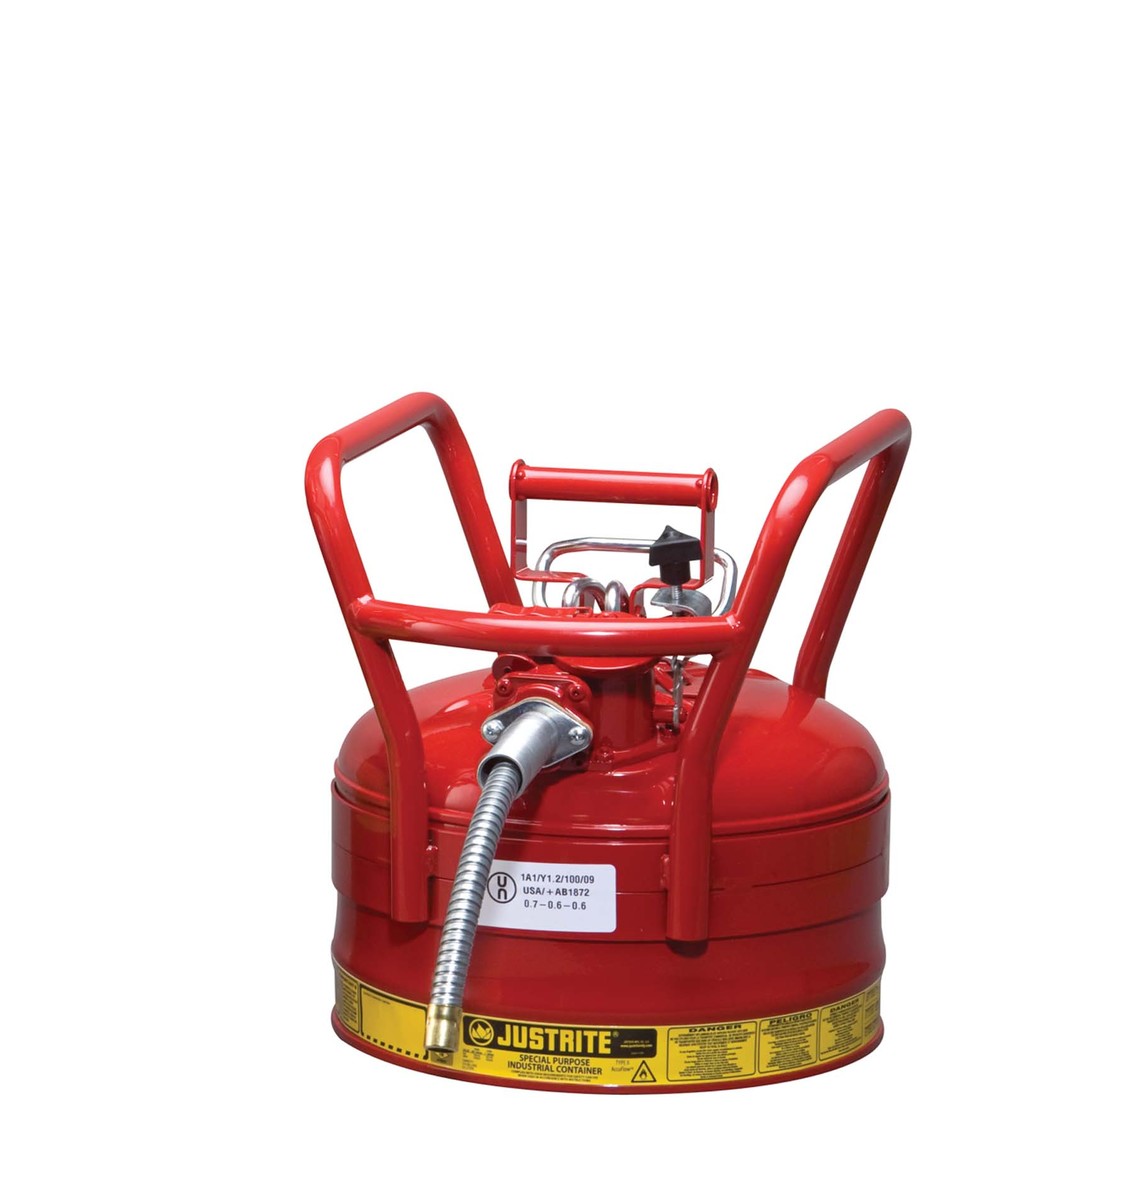 Justrite™ 2 1/2 Gallon Red AccuFlow™ Galvanized Steel Type II Vented Safety Can With Flame Arrester, 5/8